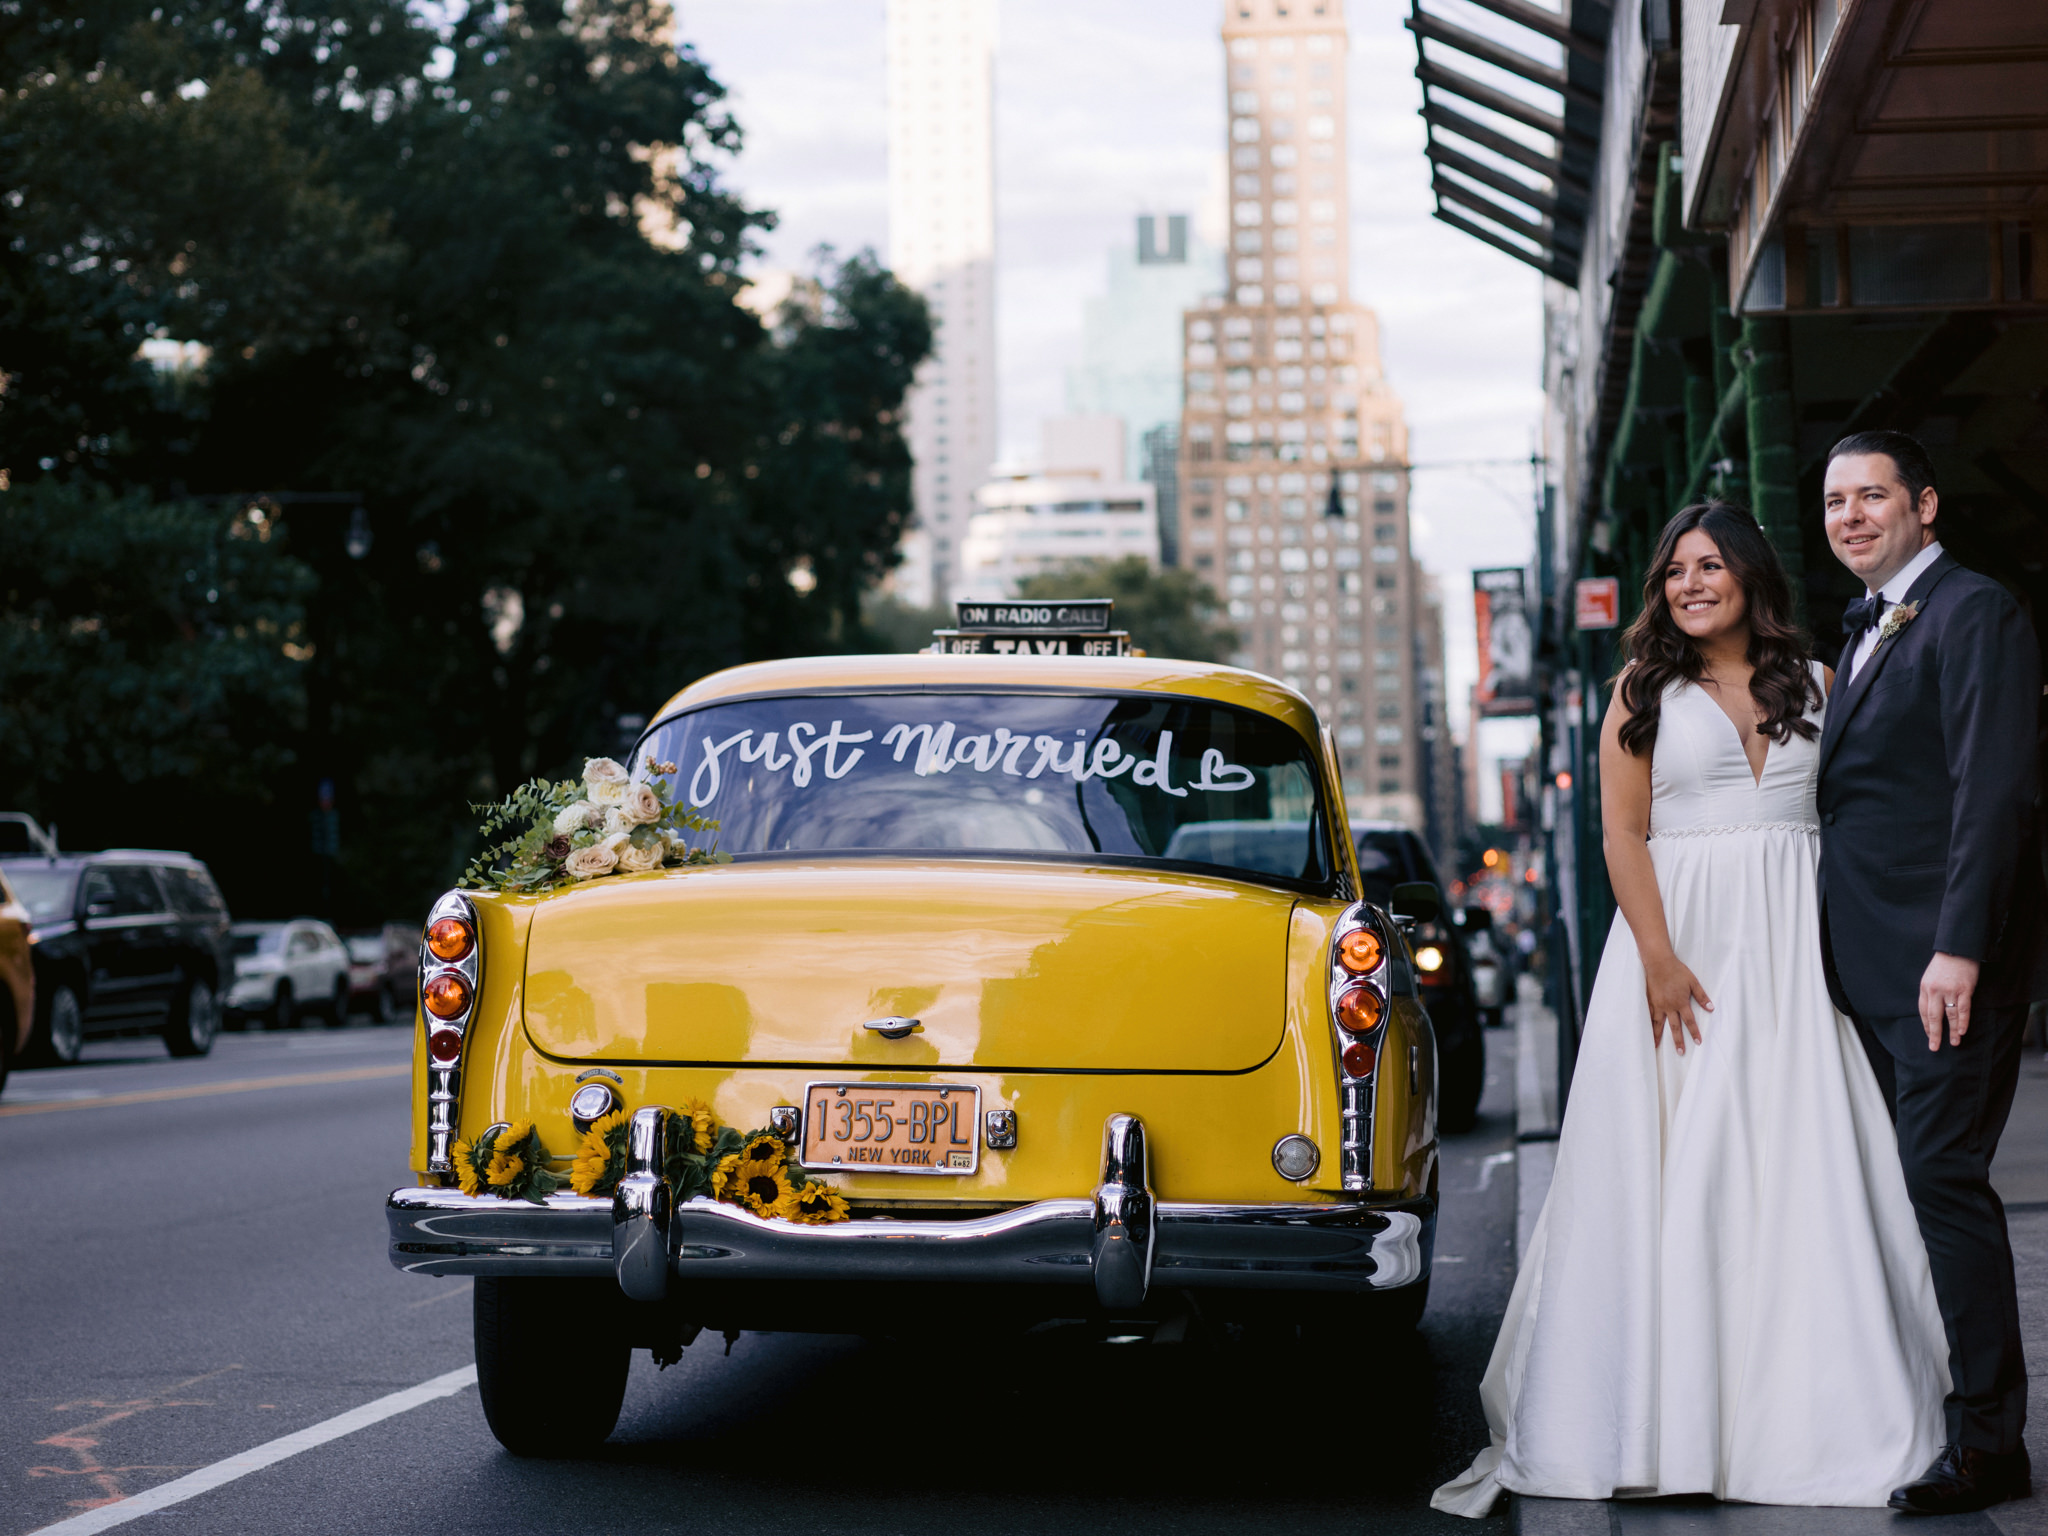 Bride and groom smiling in the street beside a vintage NYC taxi